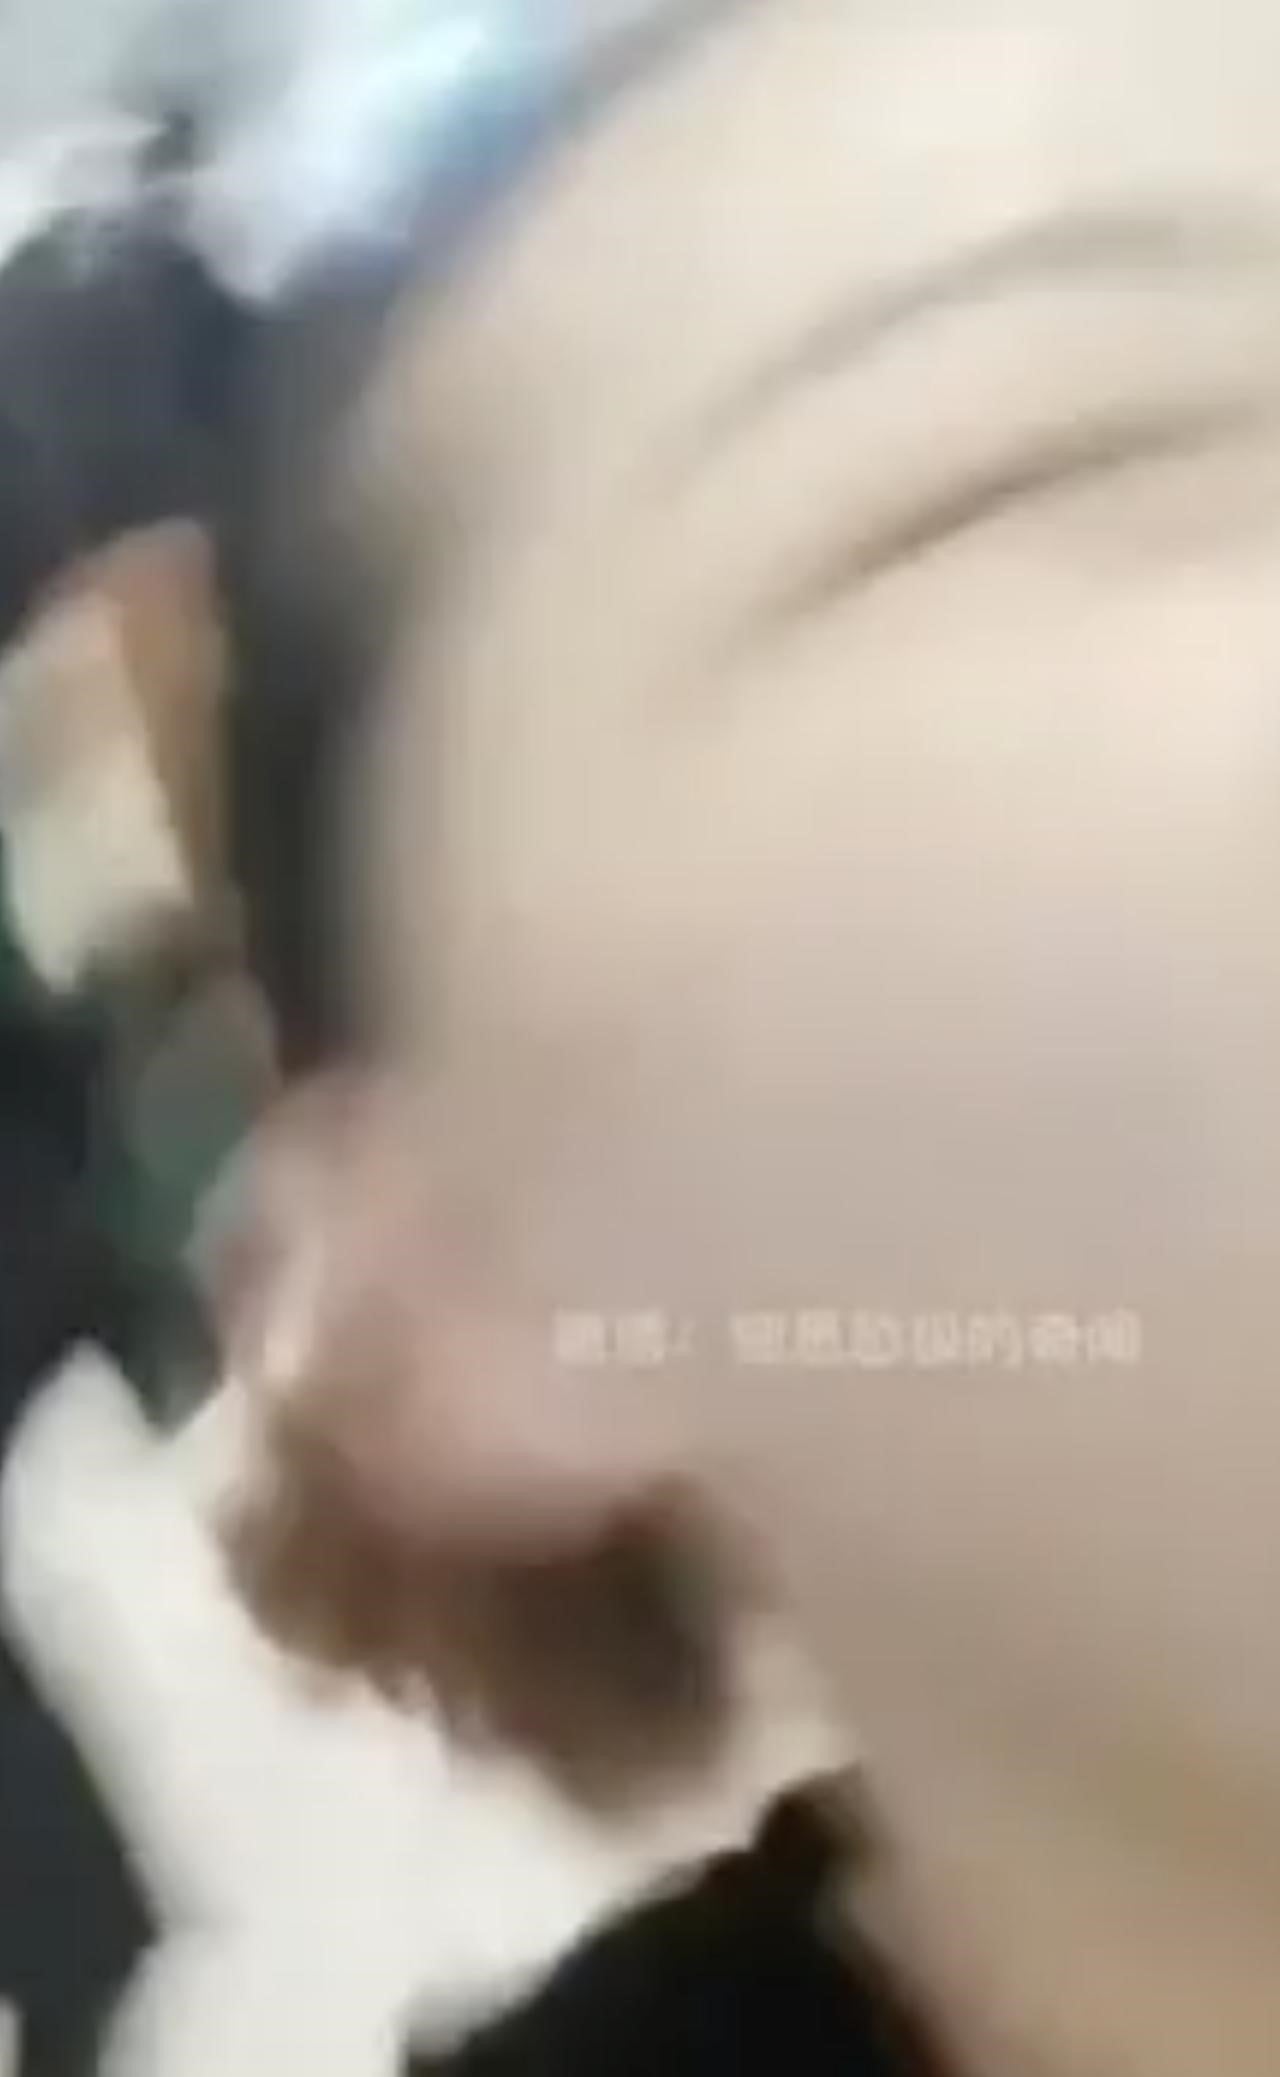 Watch: Iconic Chinese Singer, Na Ying, KICKS A Fan For Taking A Video Of Her - WORLD OF BUZZ 3